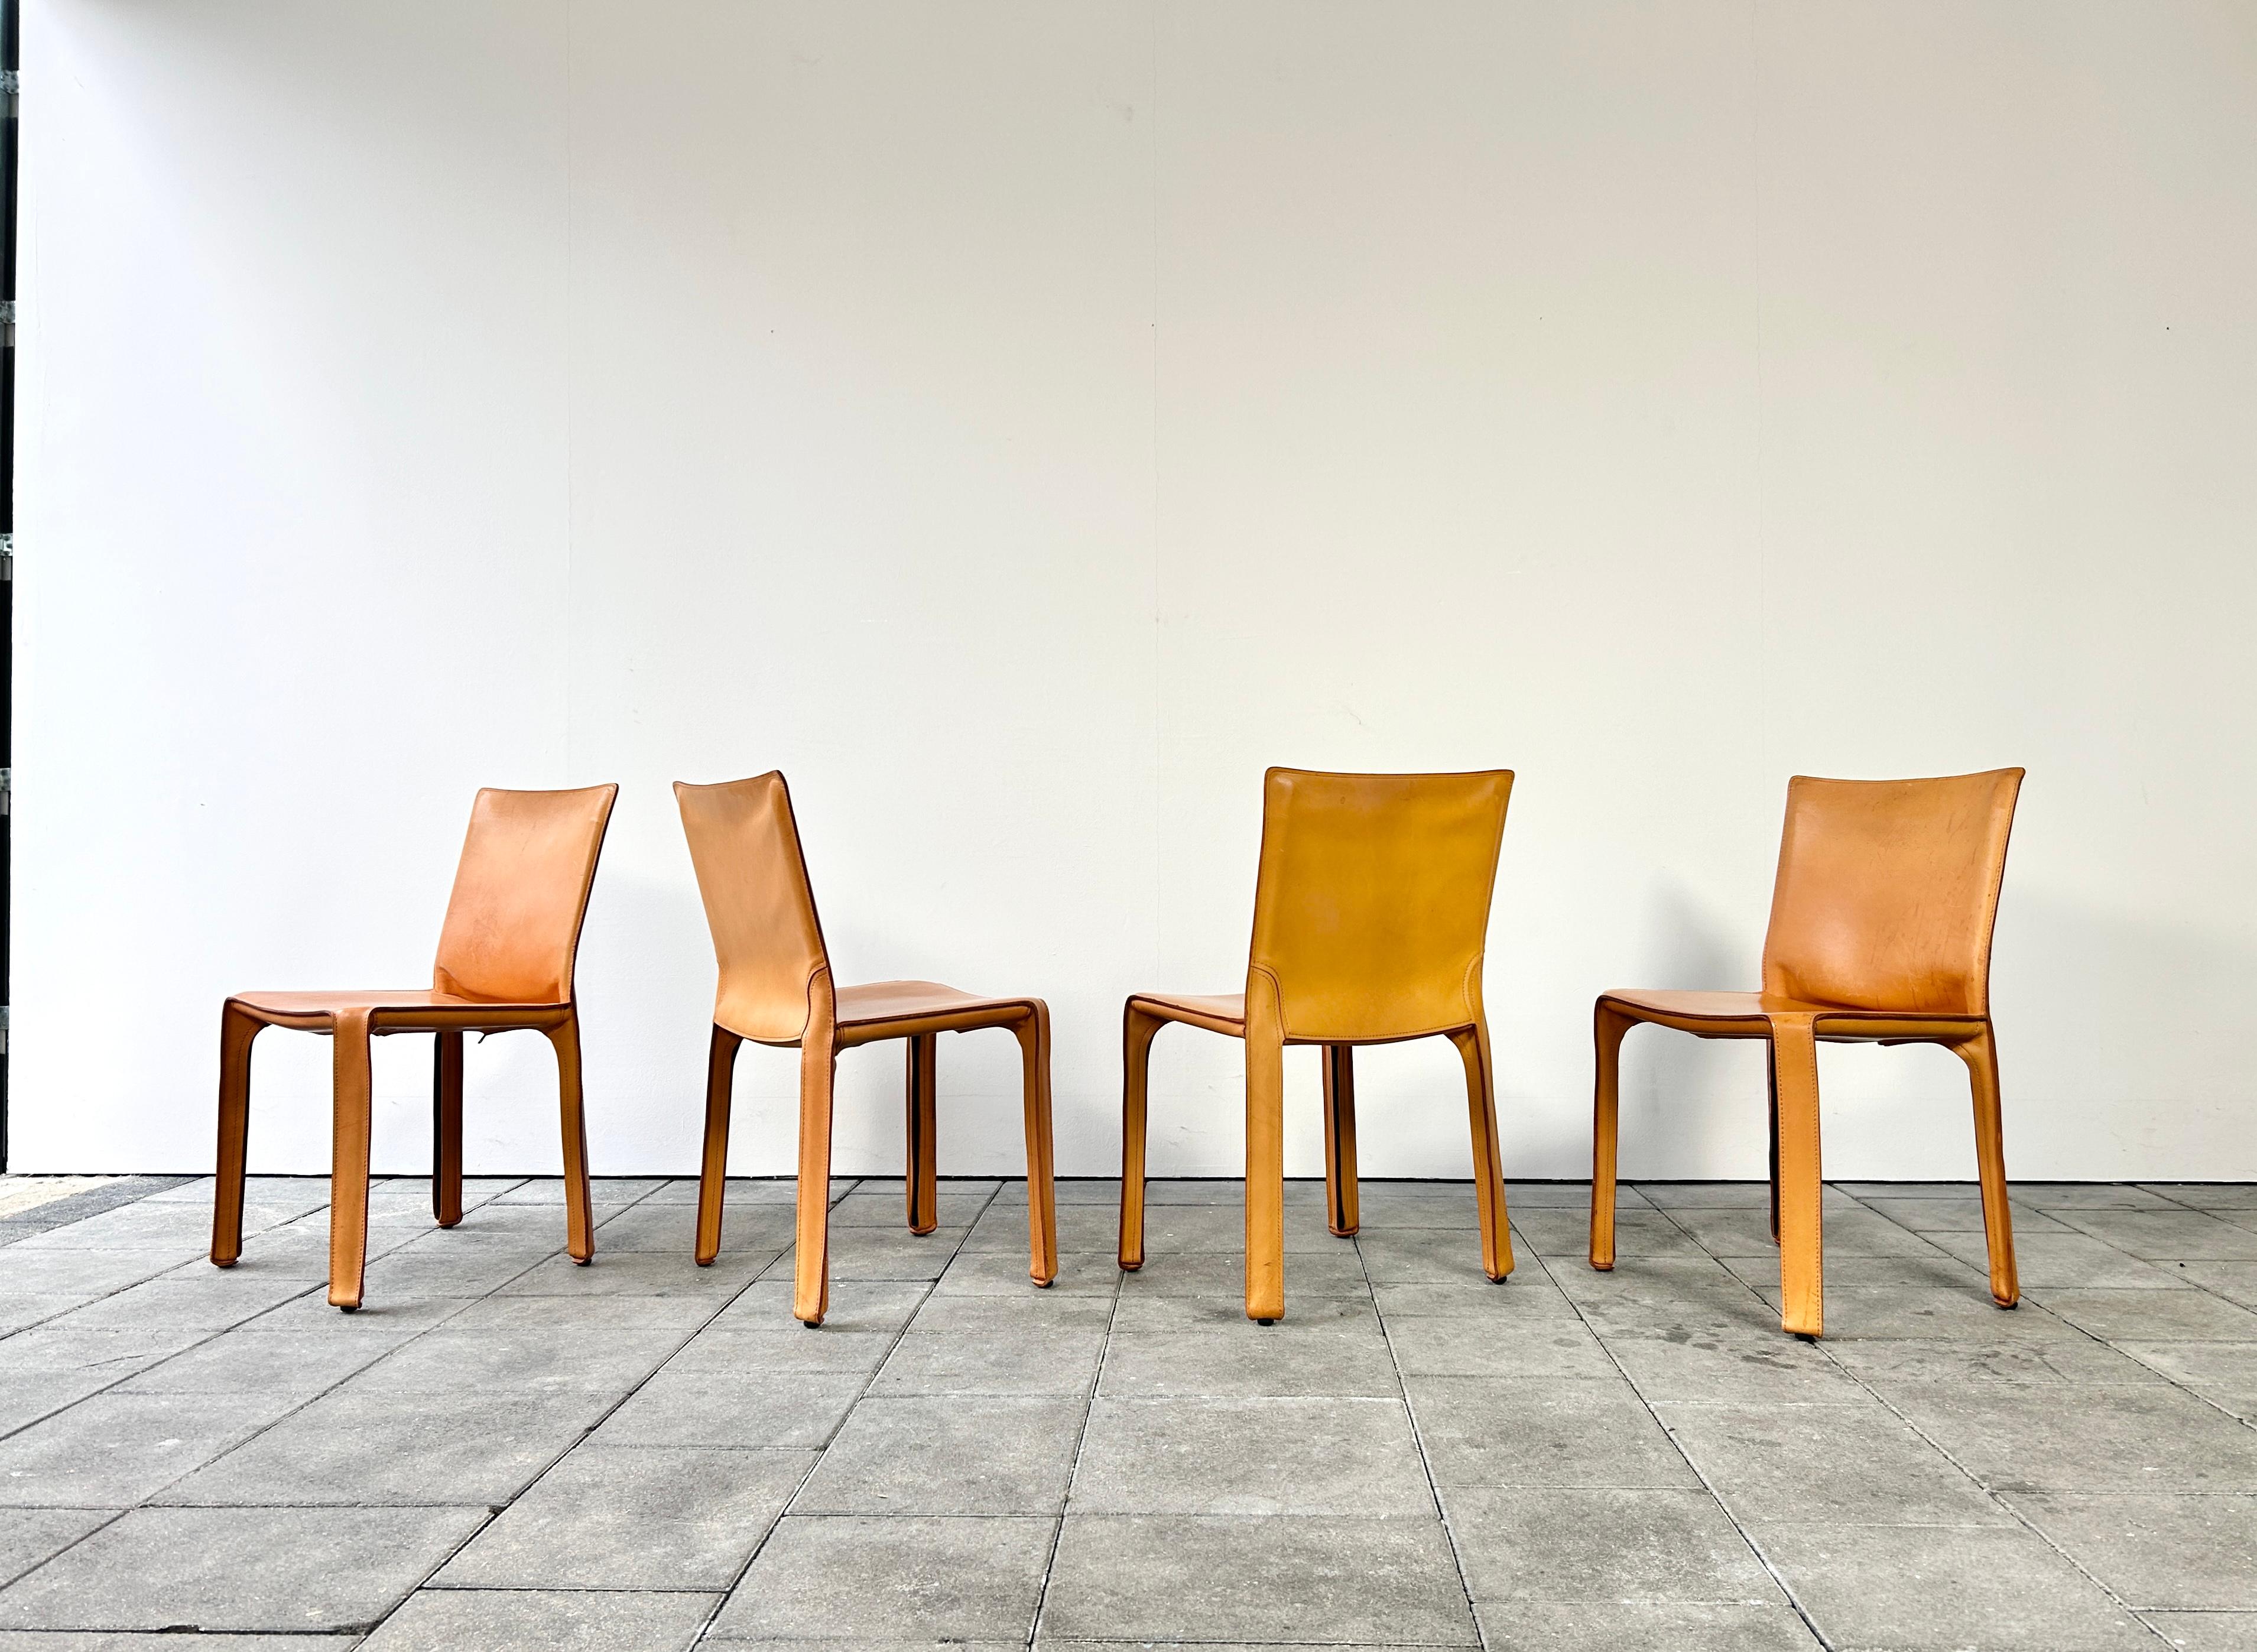 Italian Set of 4 Cassina Cab Chairs designed by Mario Bellini 1978 in Natural Leather